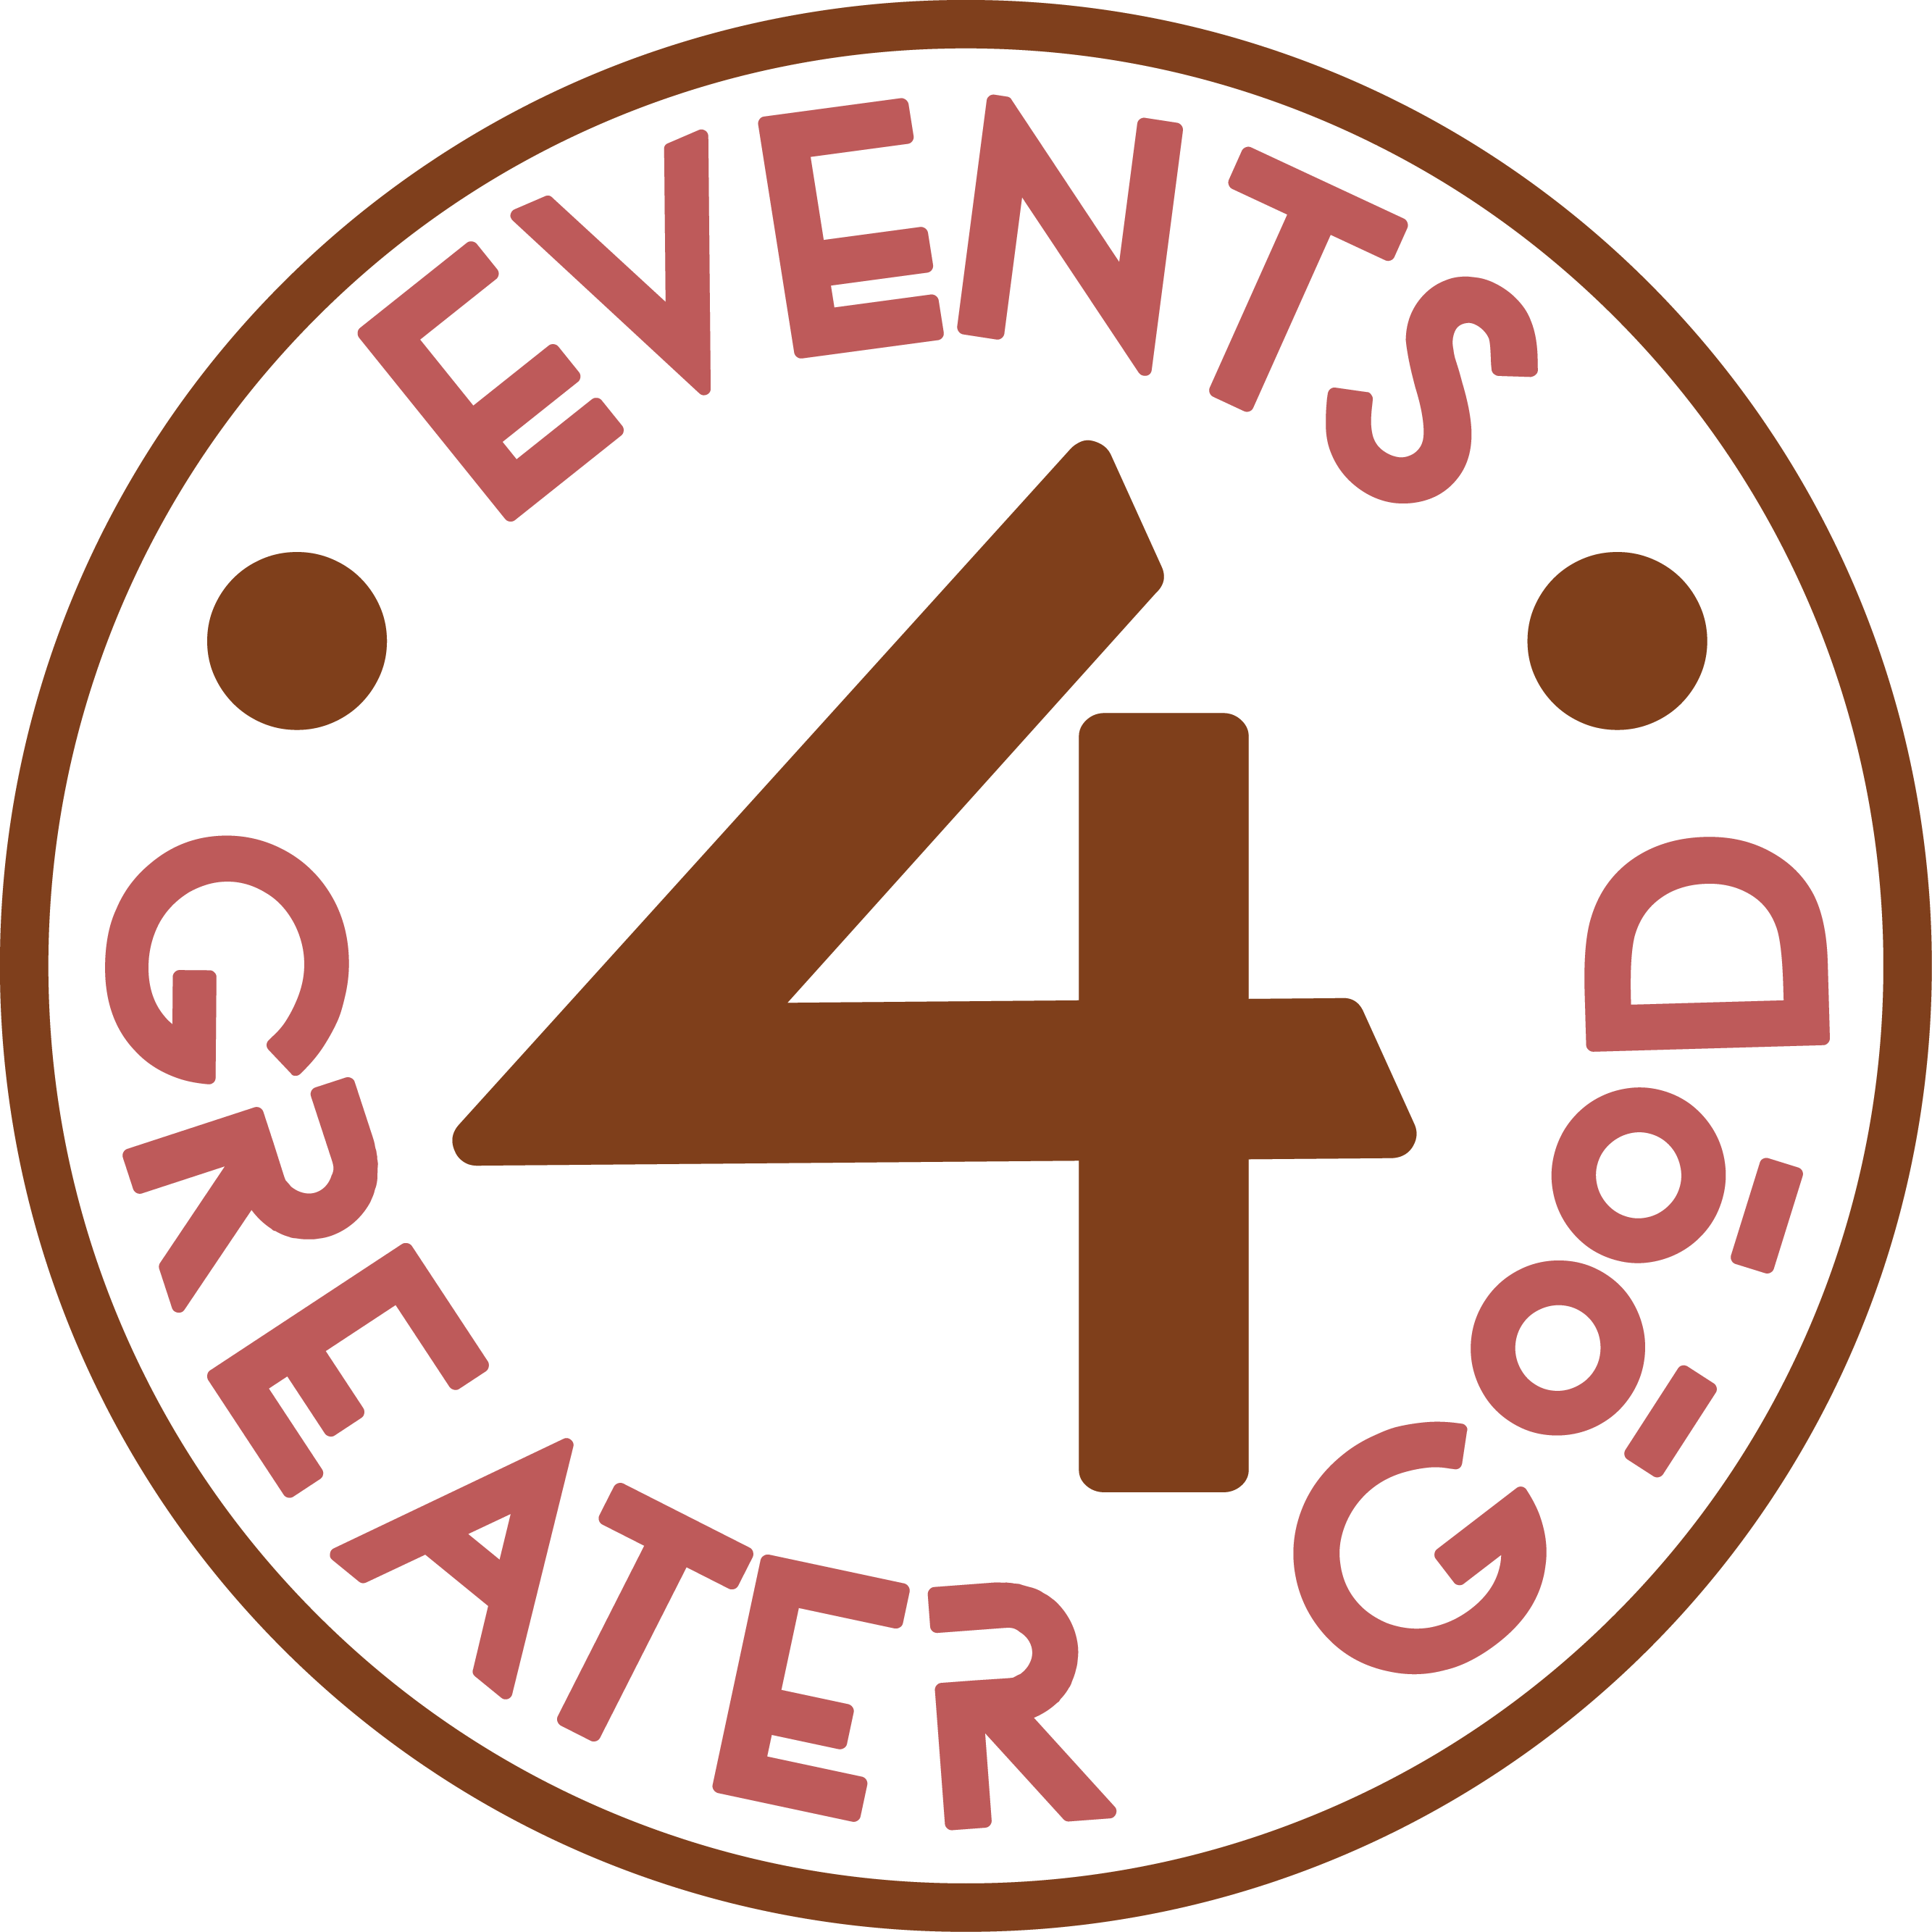 Events4GreaterGood